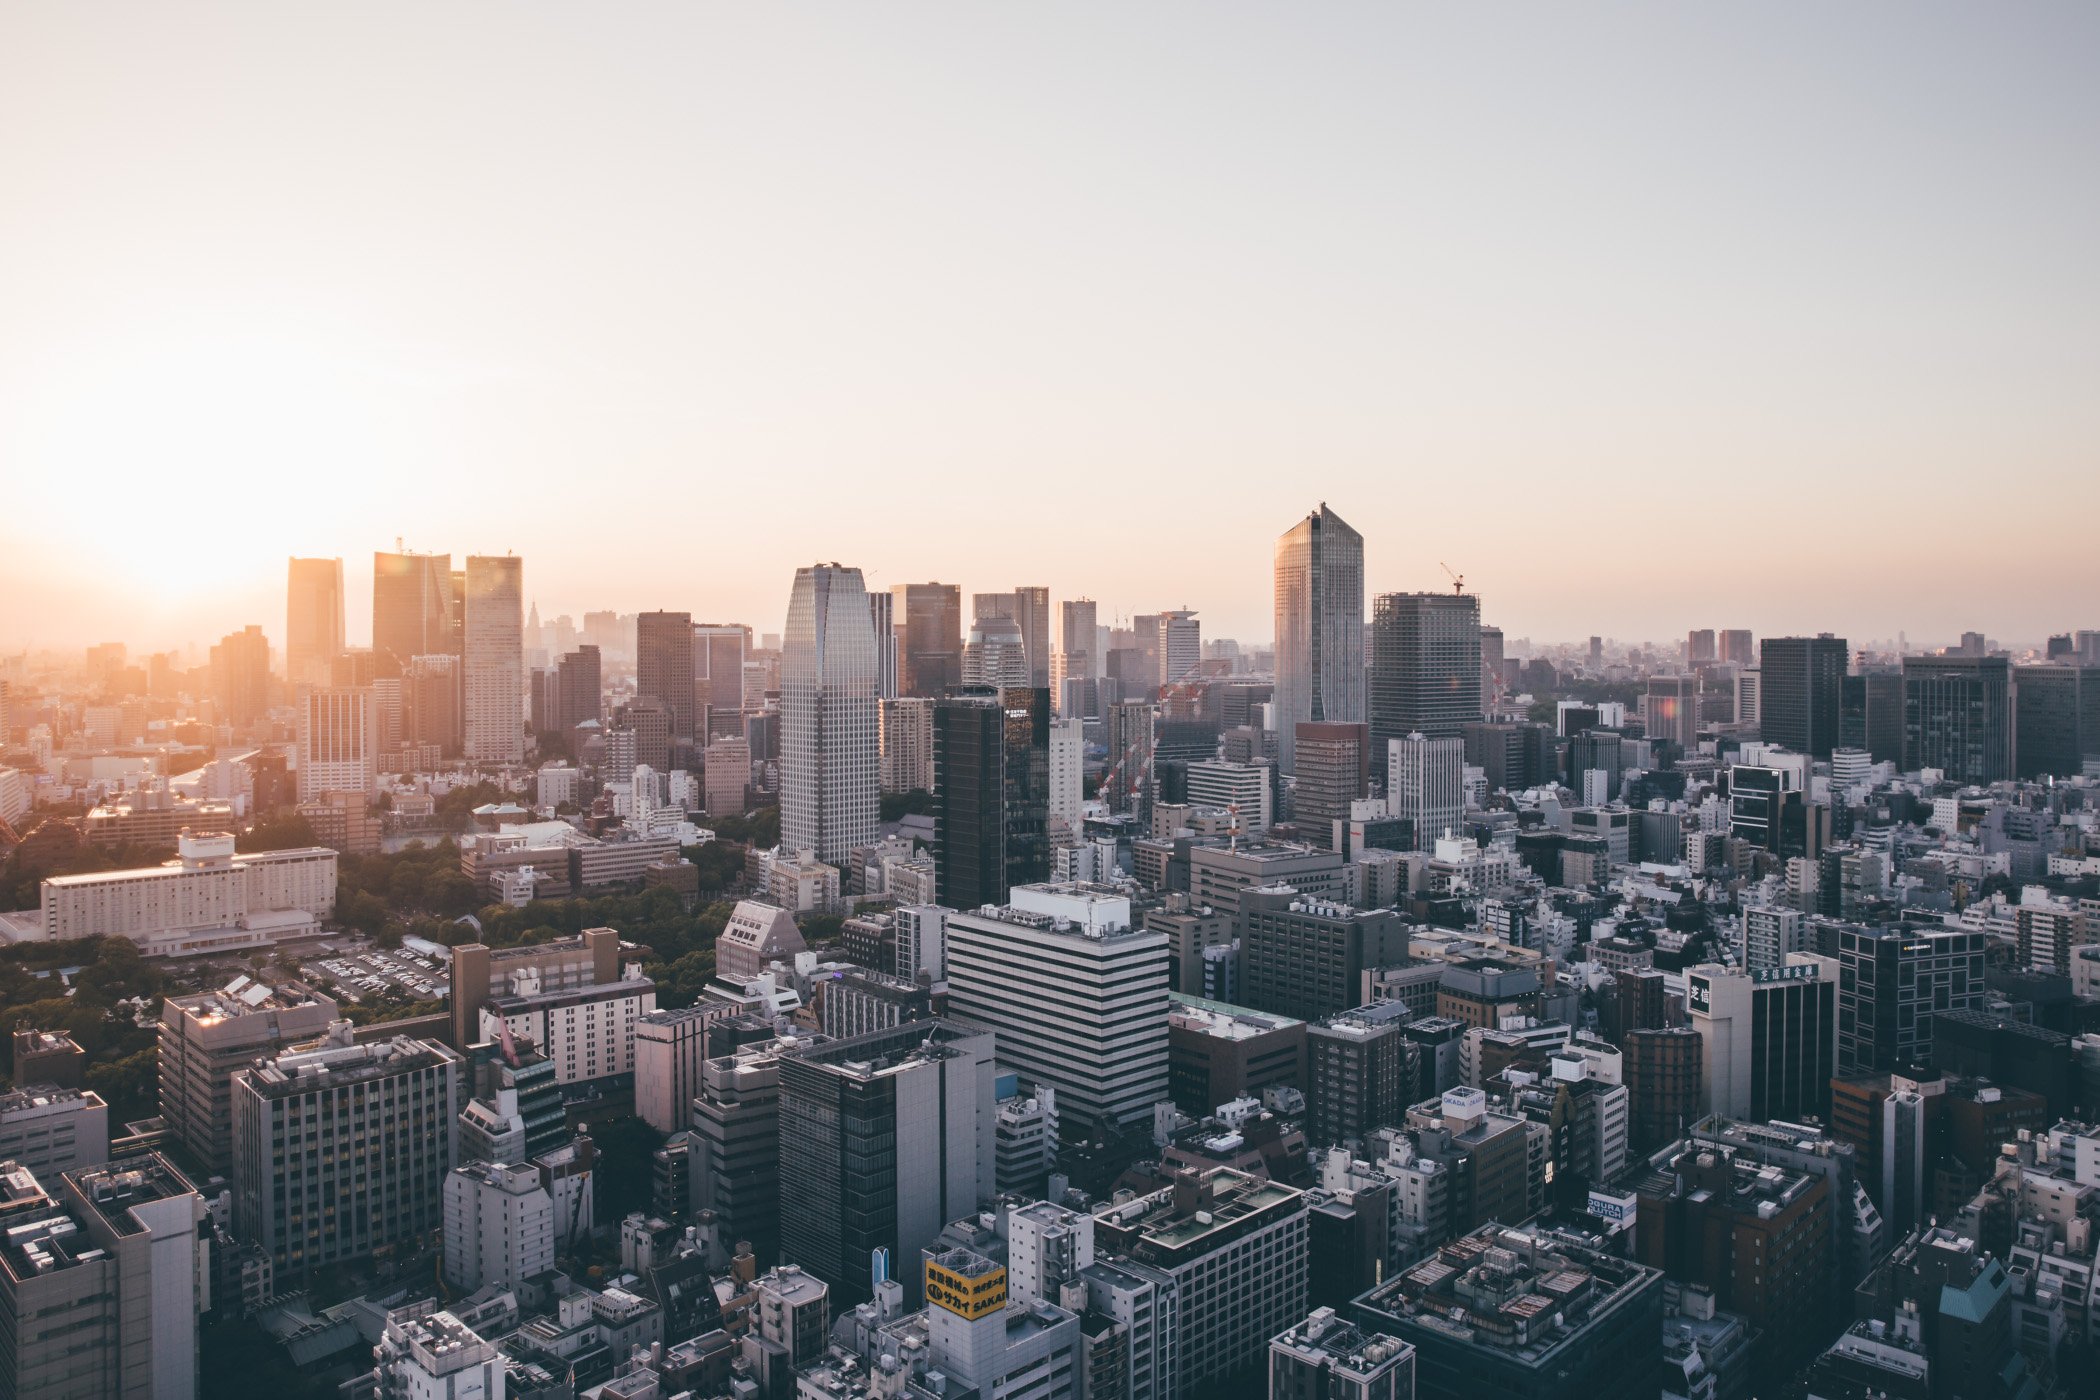 Tokyo as seen from above